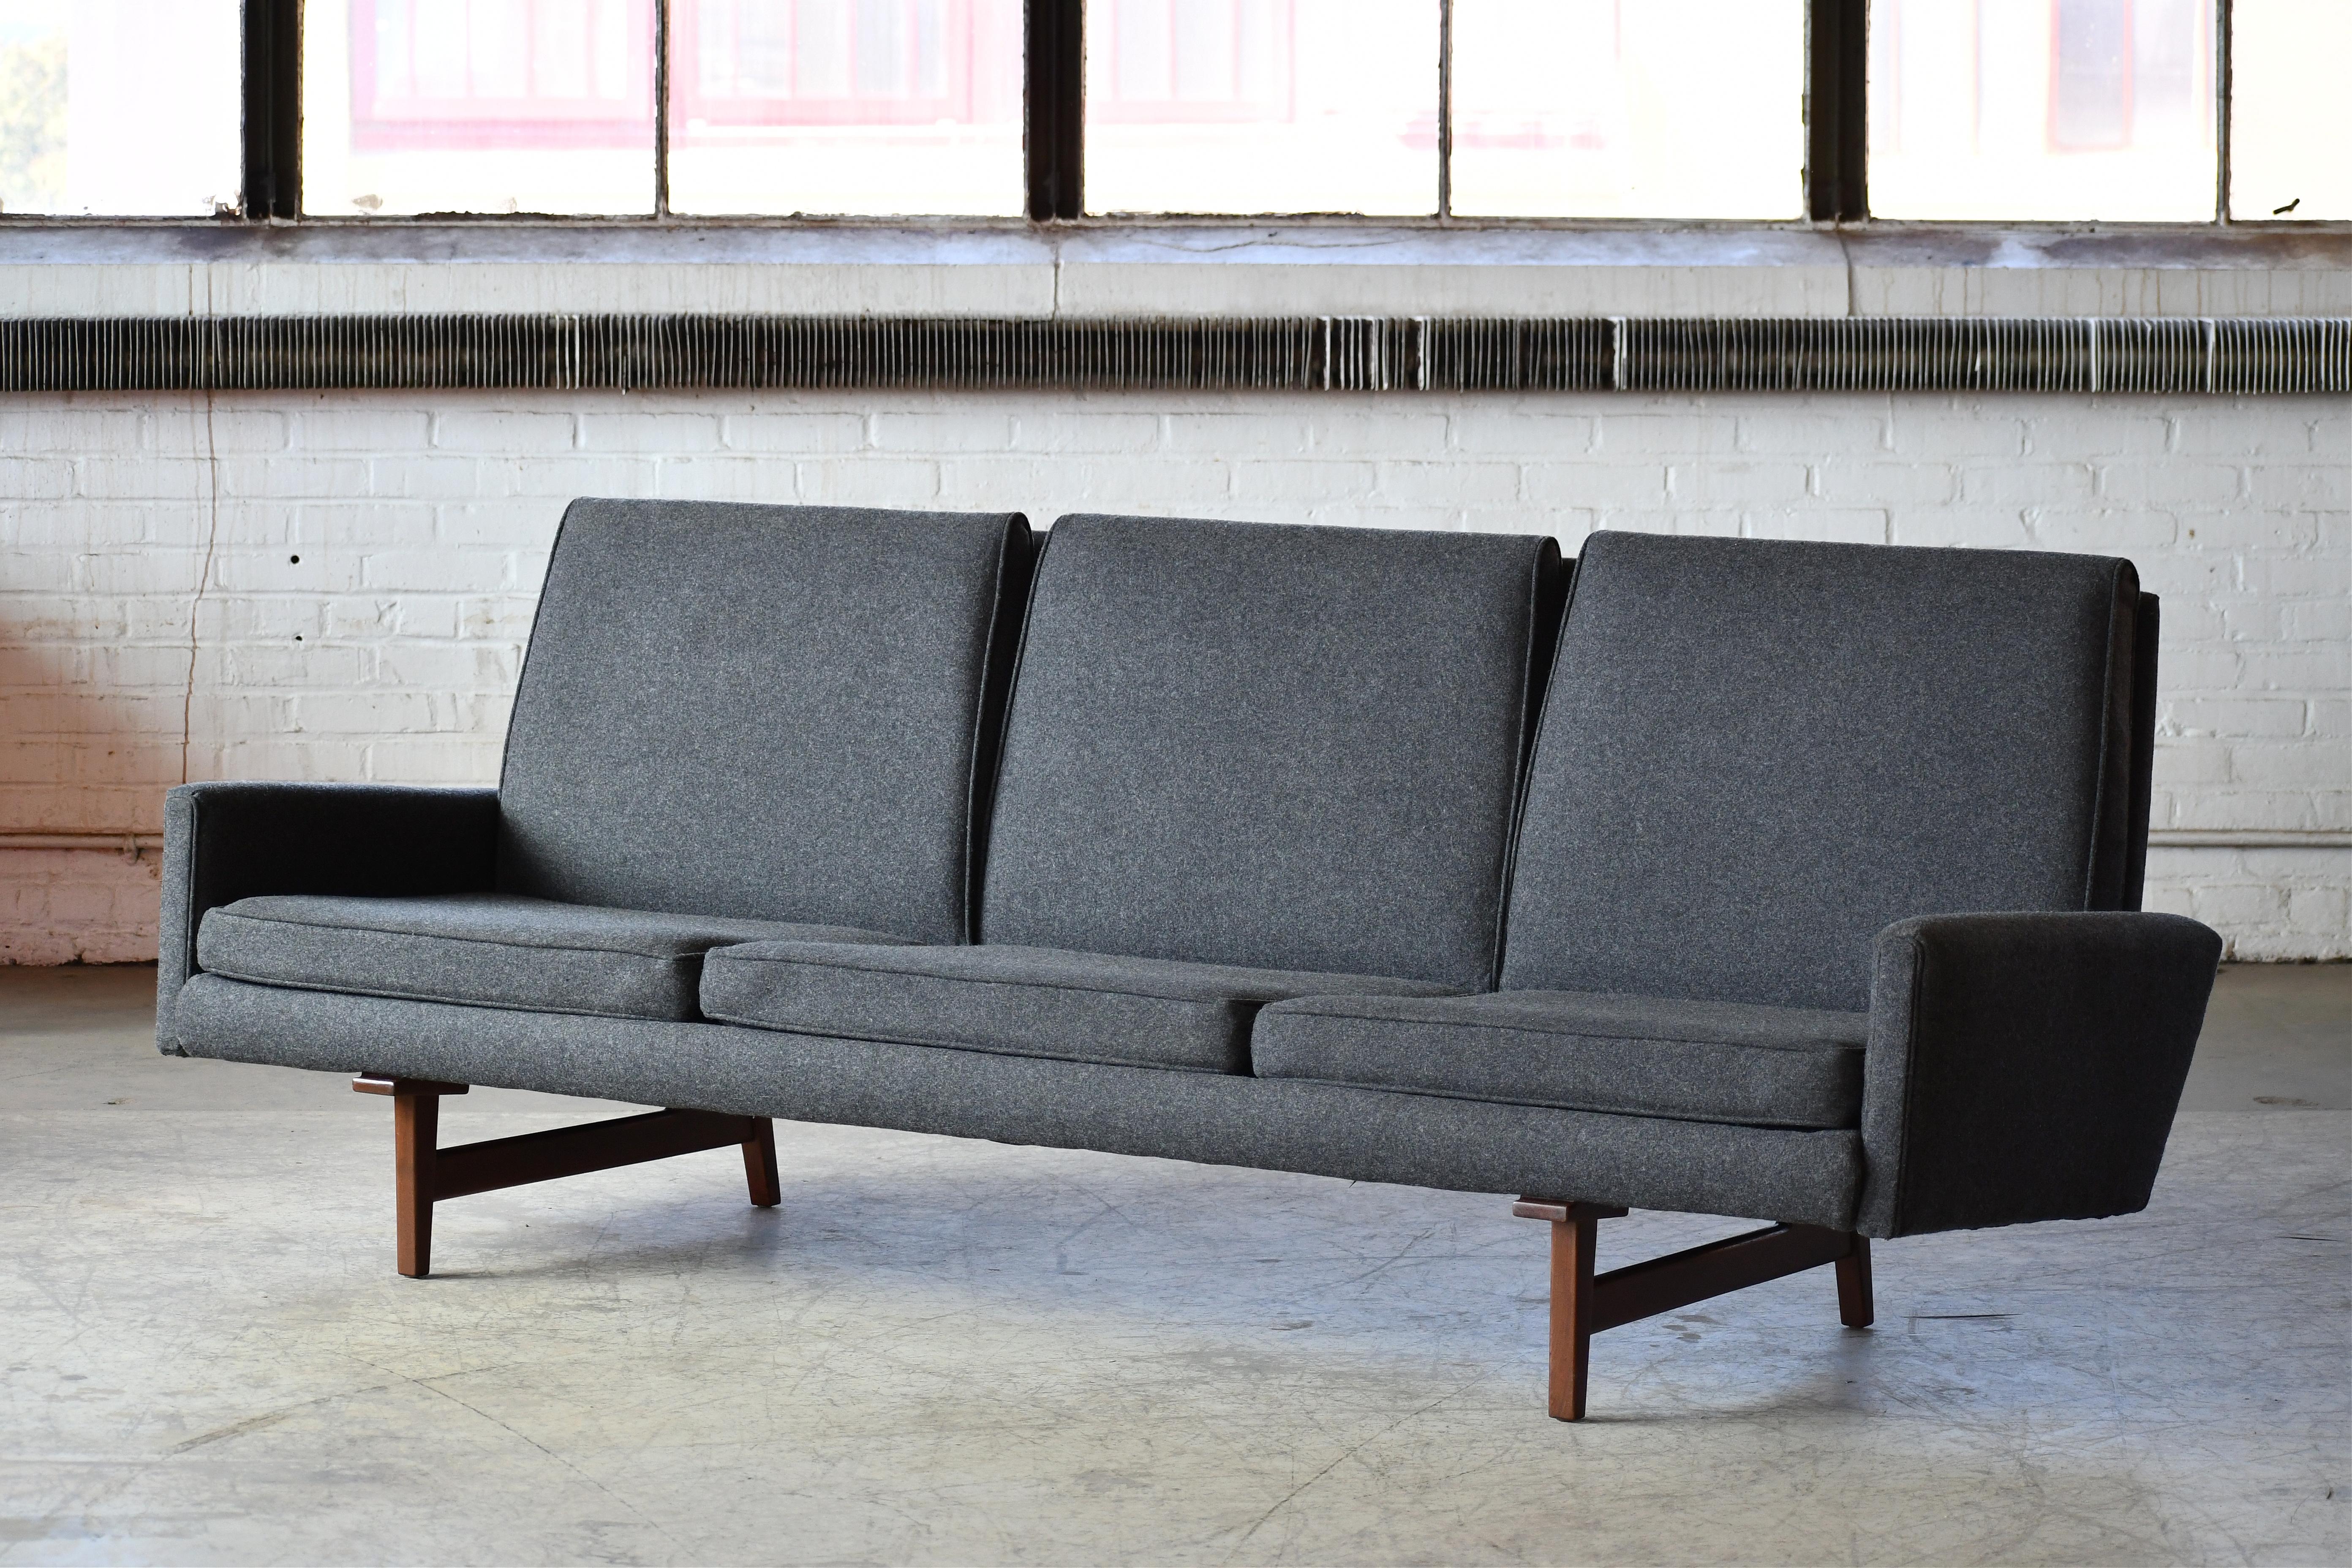 Mid-20th Century Mid-Century Sofa in Walnut by Jens Risom Newly Reupholstered in Charcoal Wool For Sale